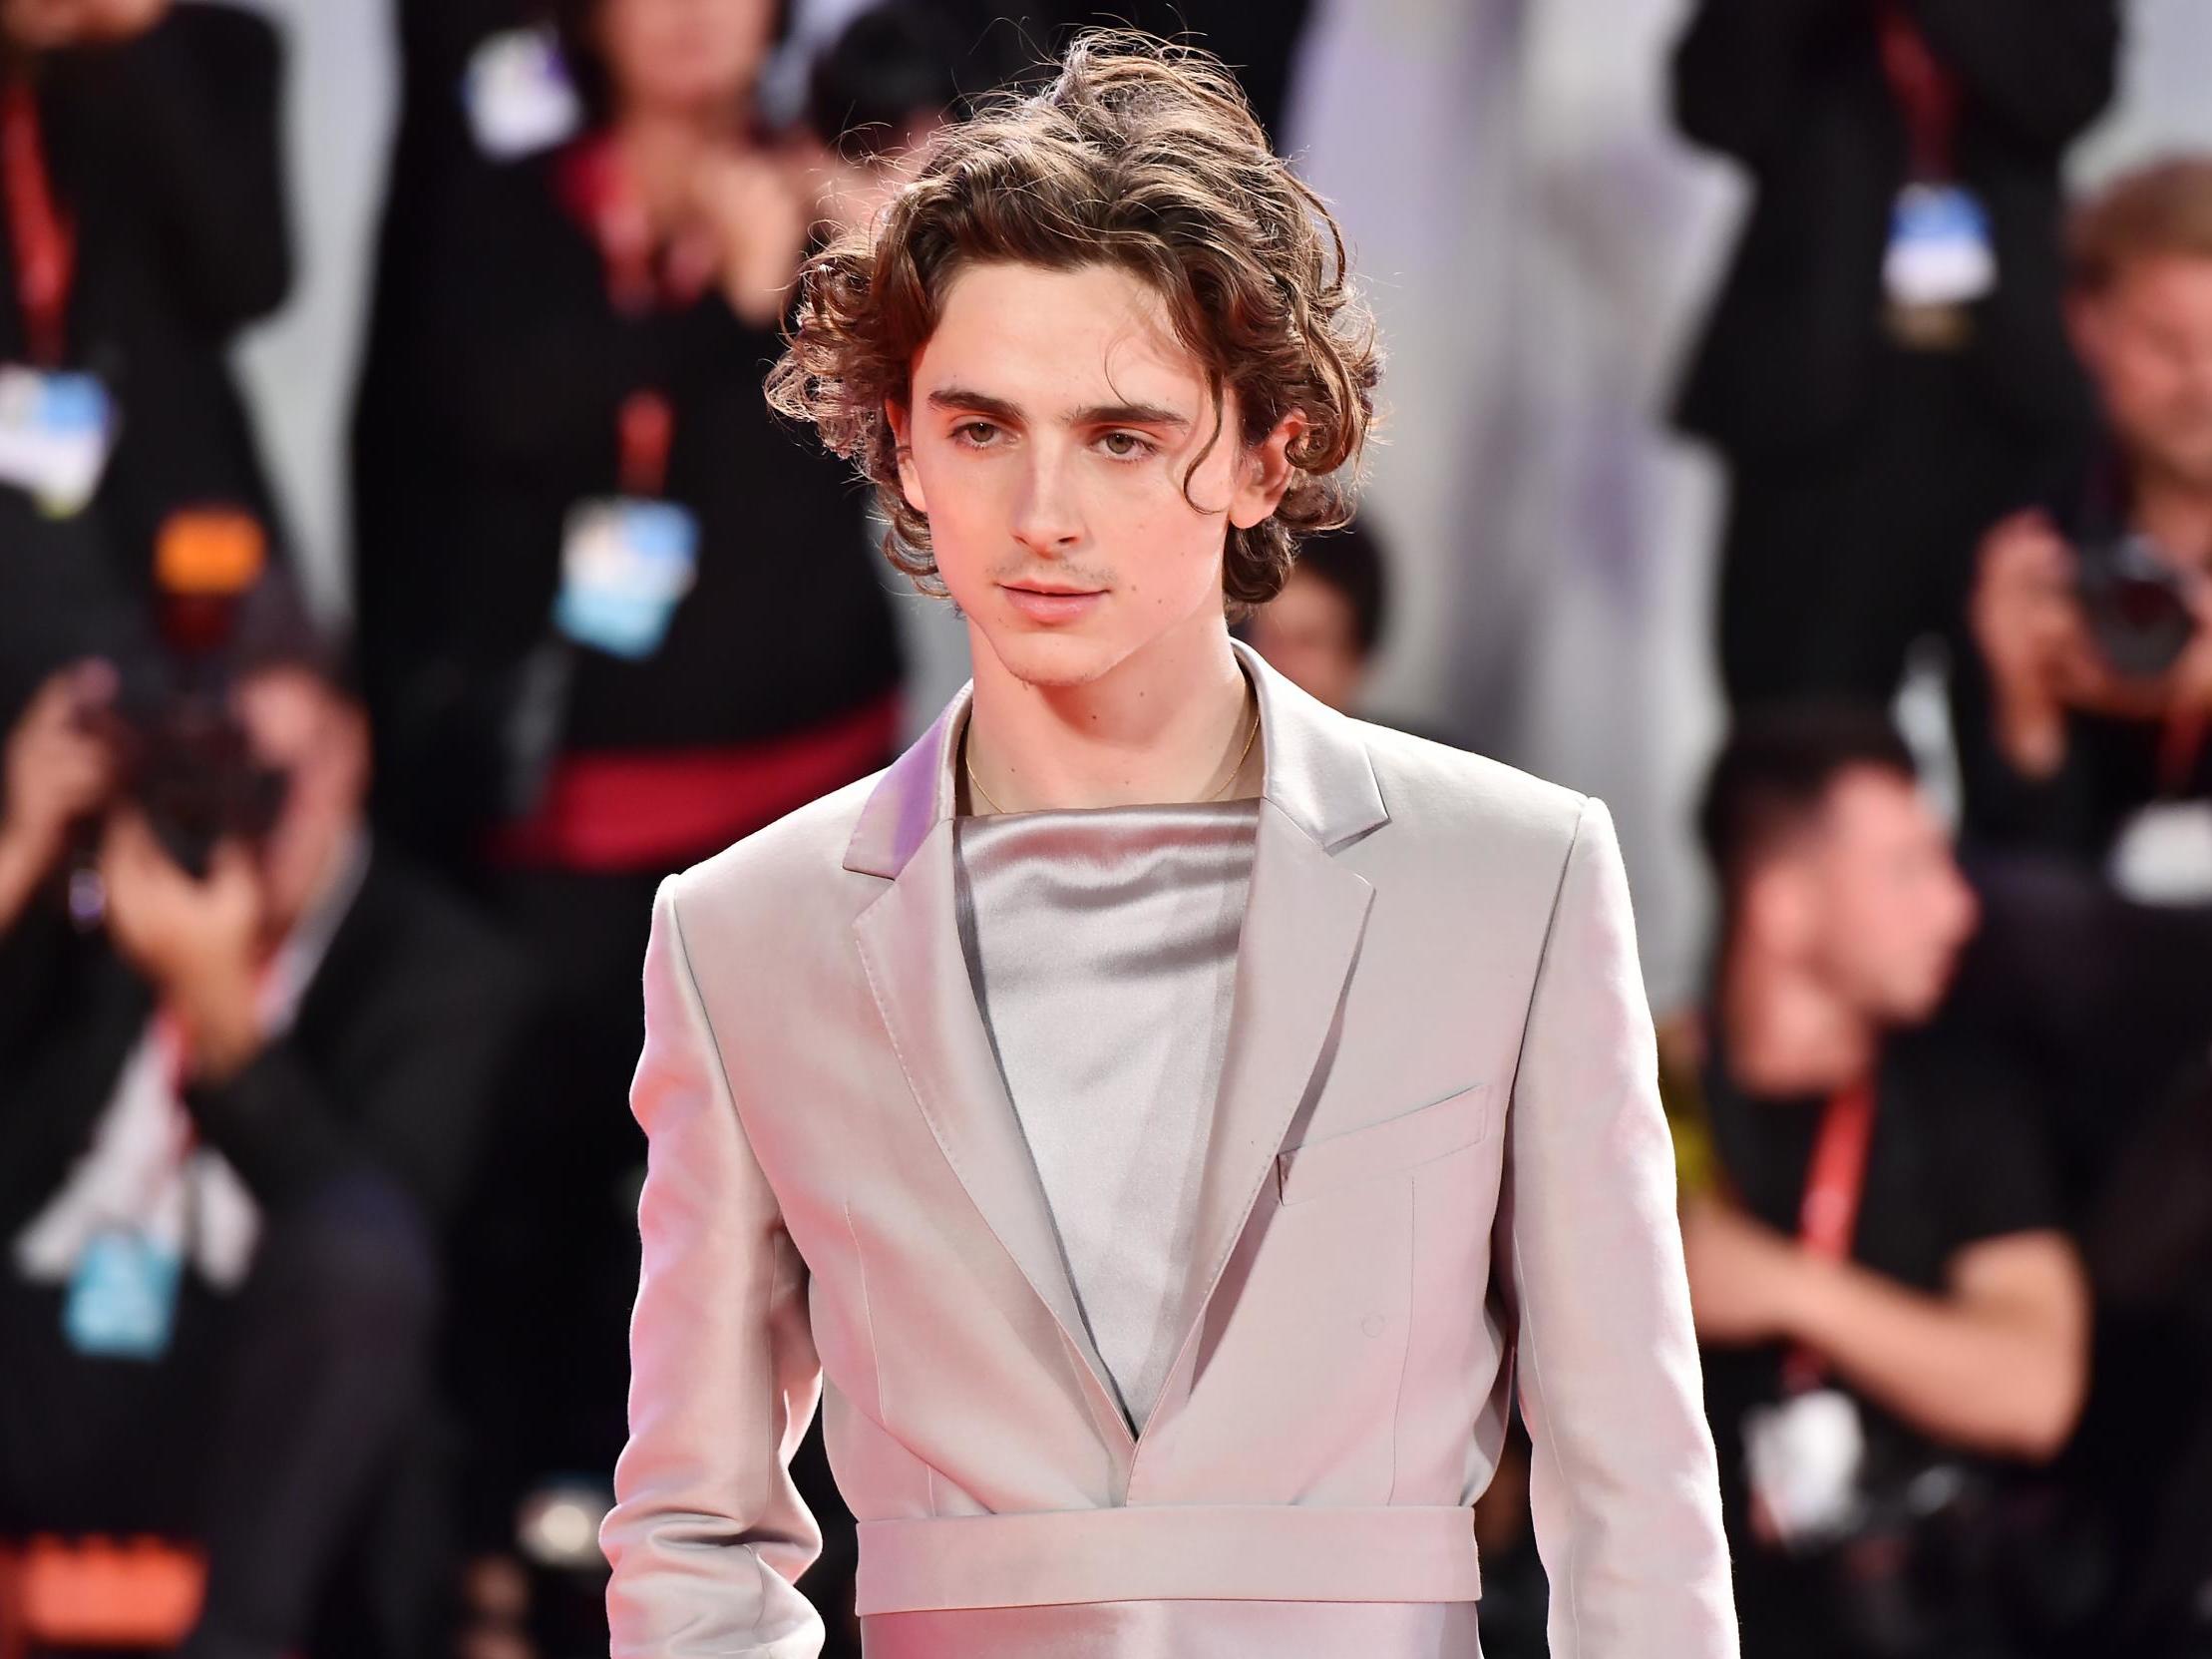 The best looks from Men's Fashion Week as chosen by GQ's global